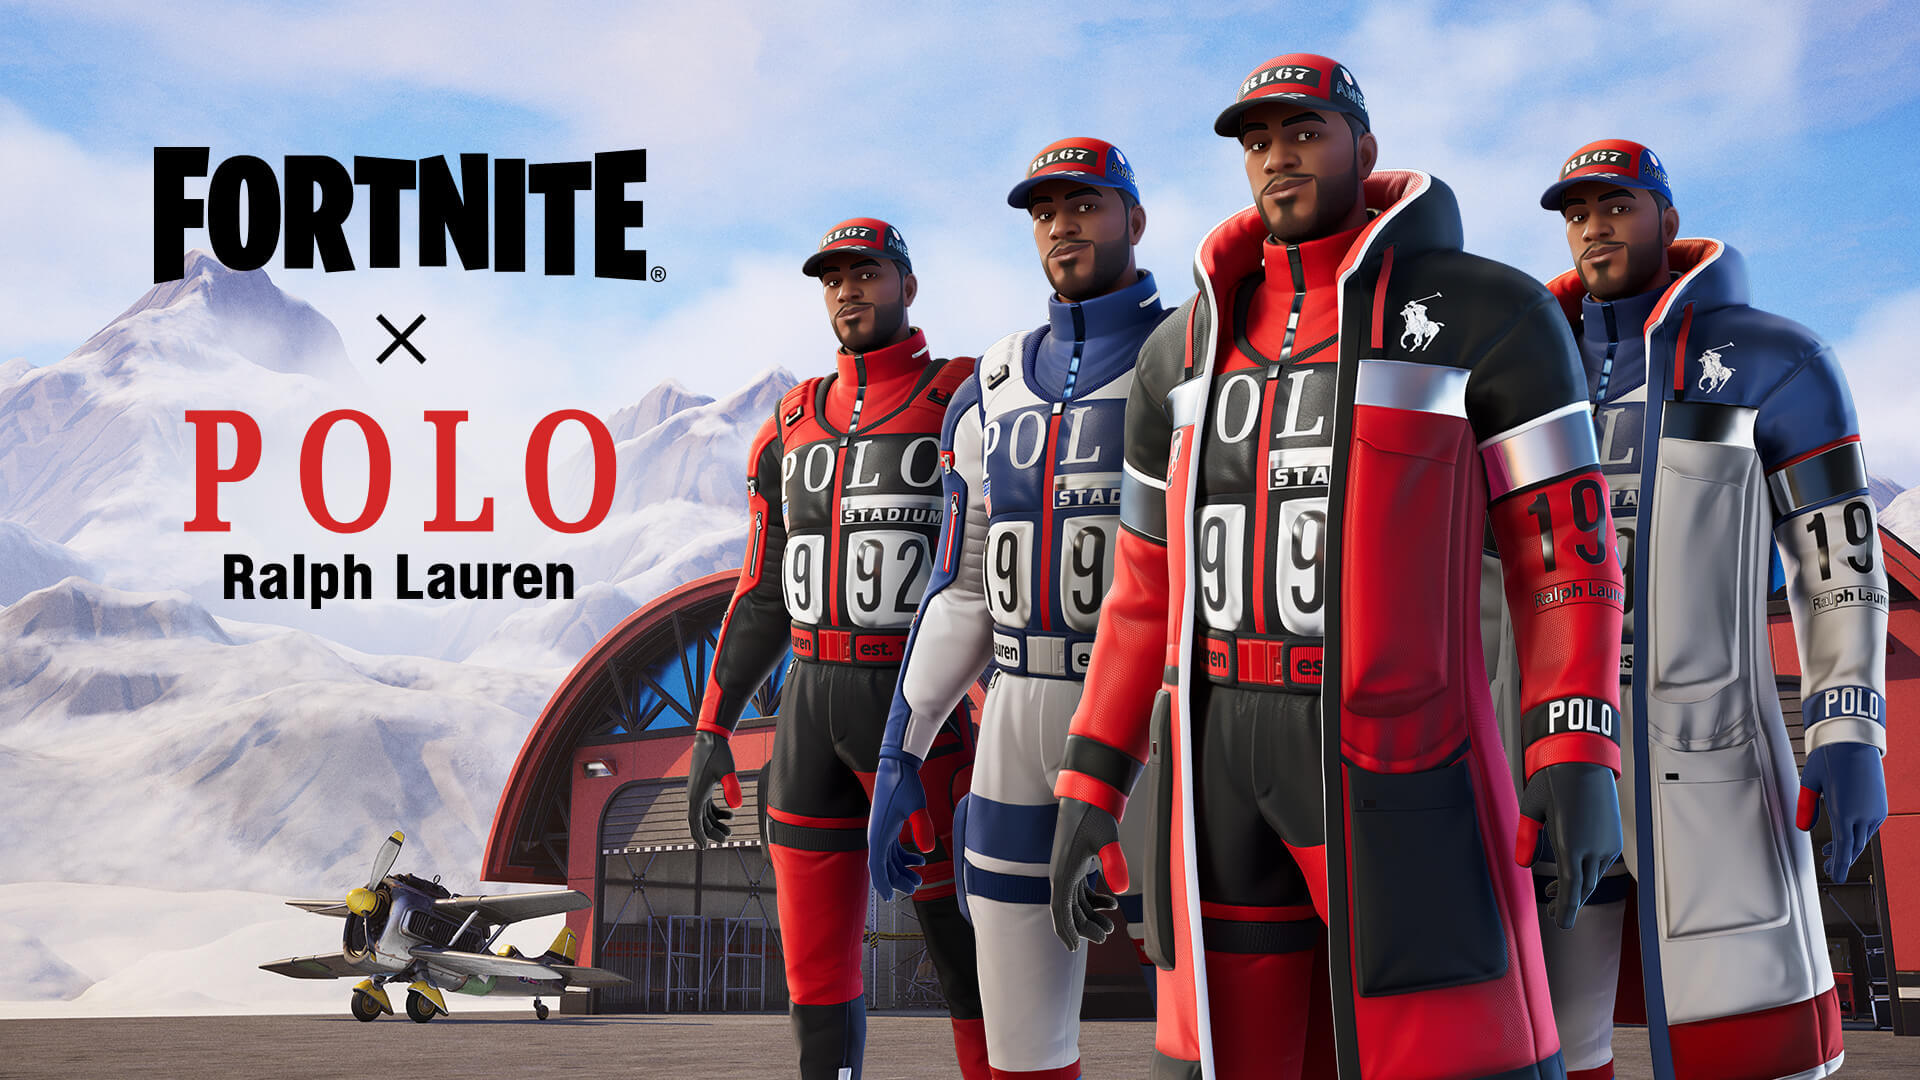 Fortnite's Polo Ralph Lauren Crossover Brings Racing Chic To